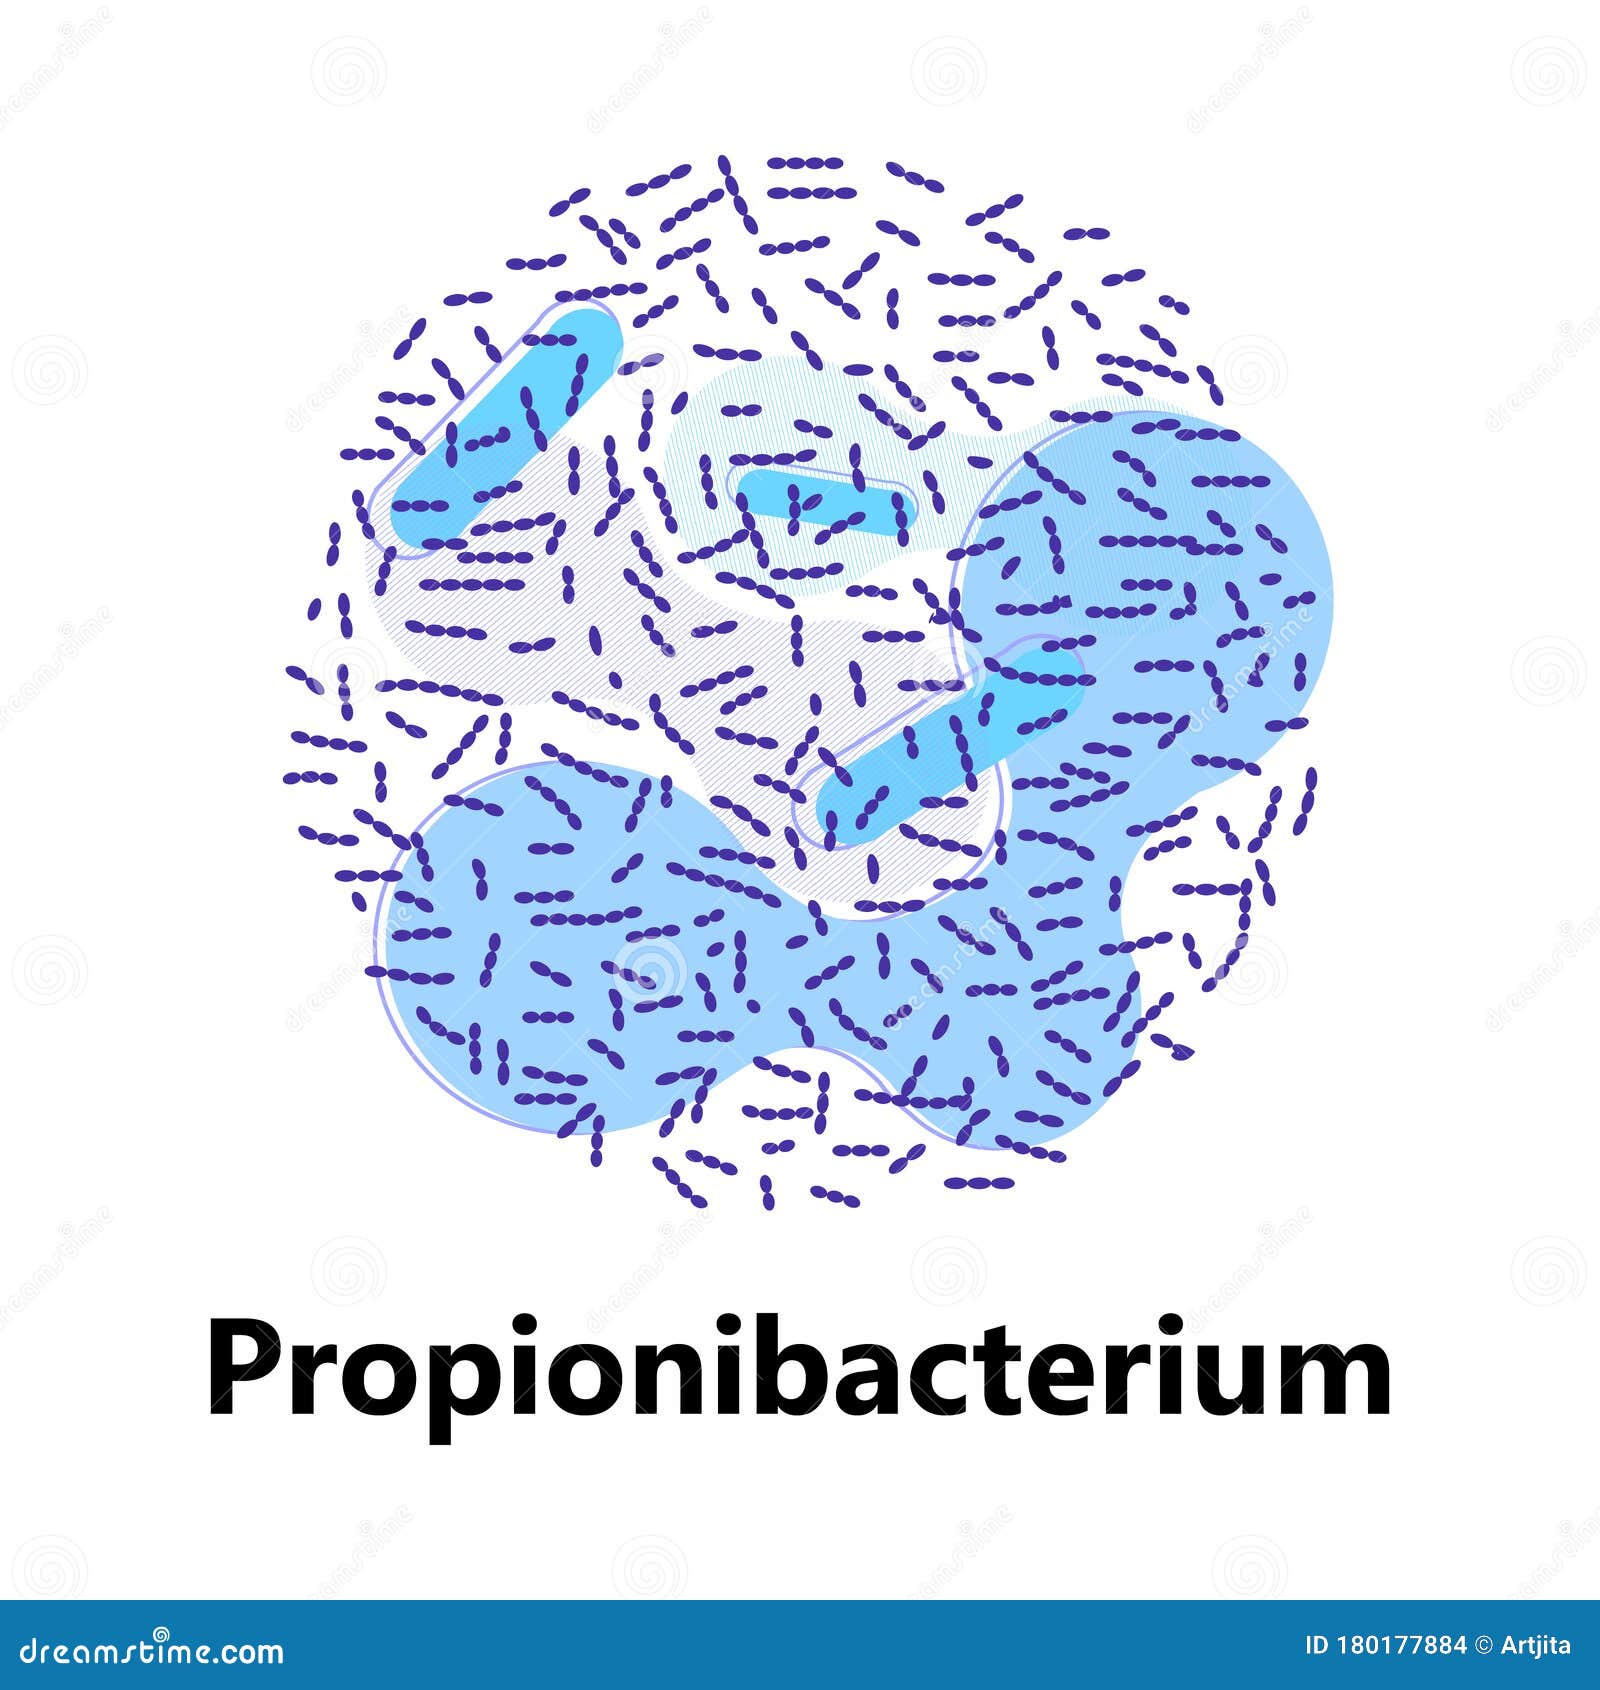 probiotics bacteria. lactobacillus, bulgaricus logo with text. amorphous s for milk products are shown such as yogurt,